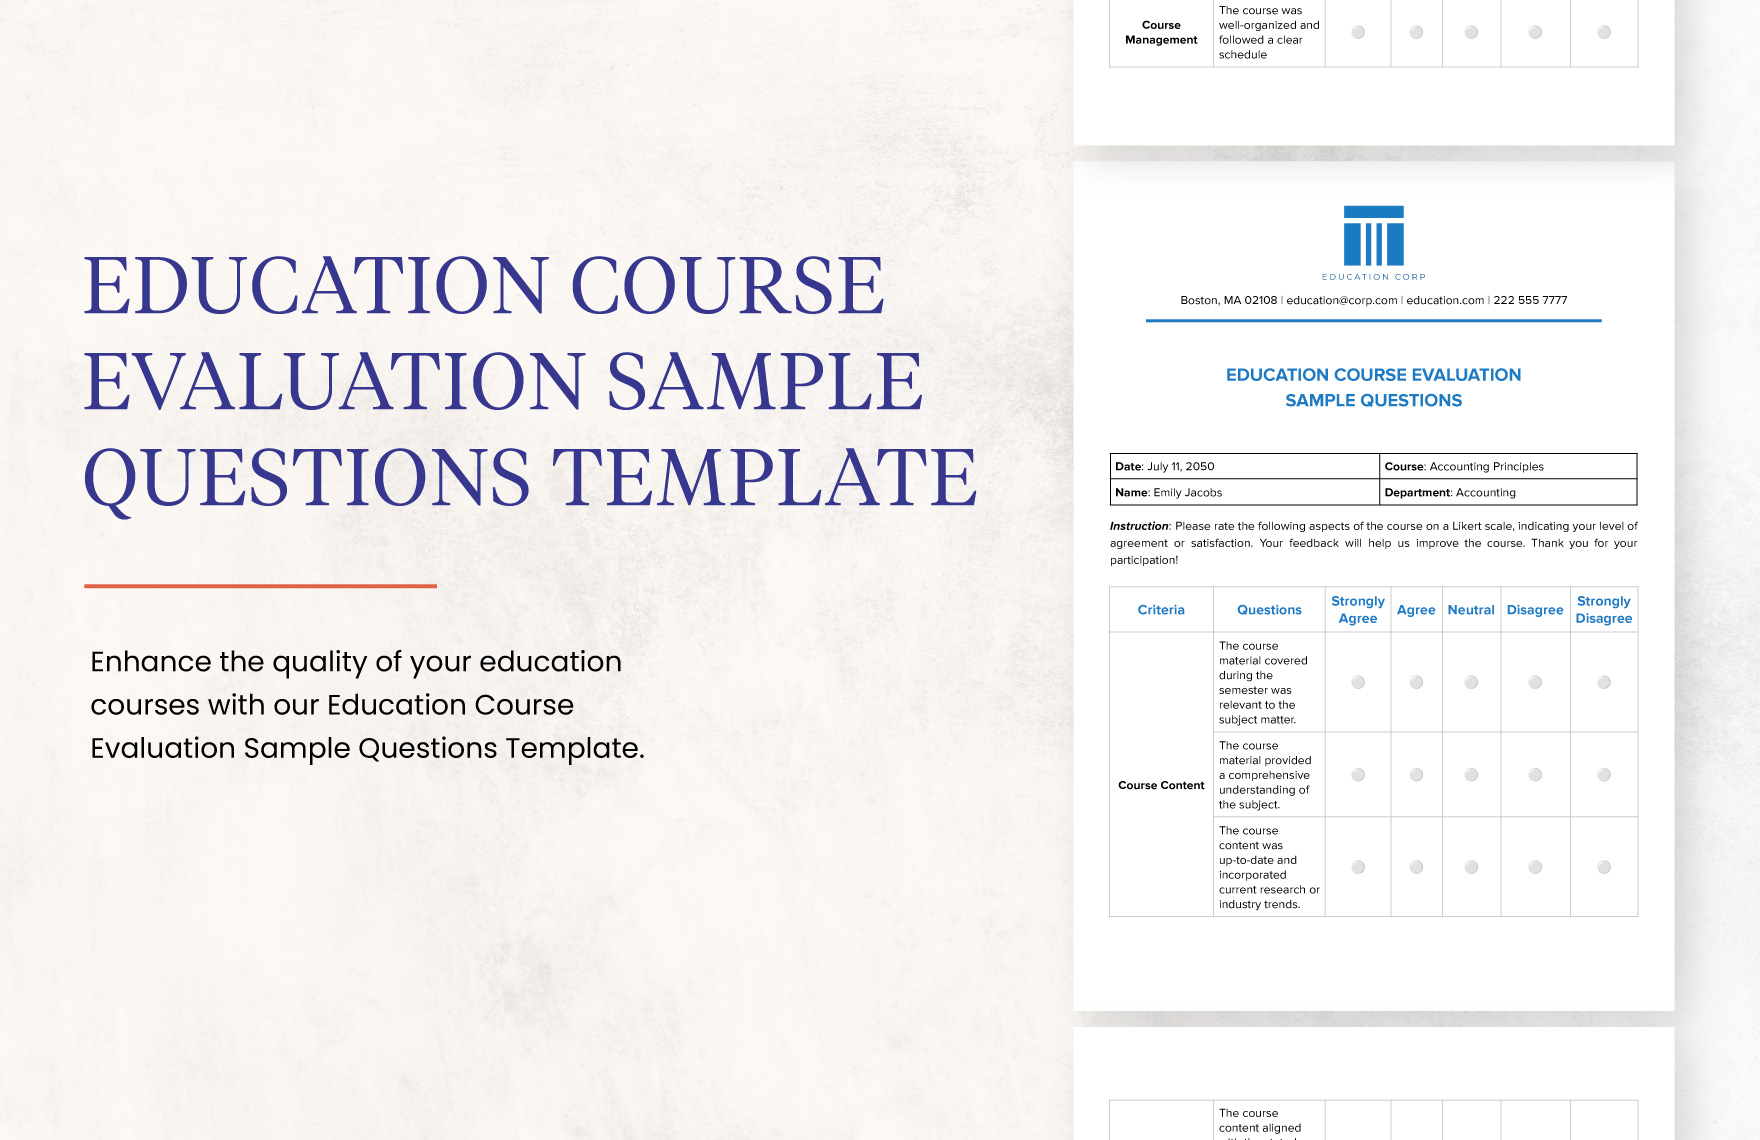 Education Course Evaluation Sample Questions Template